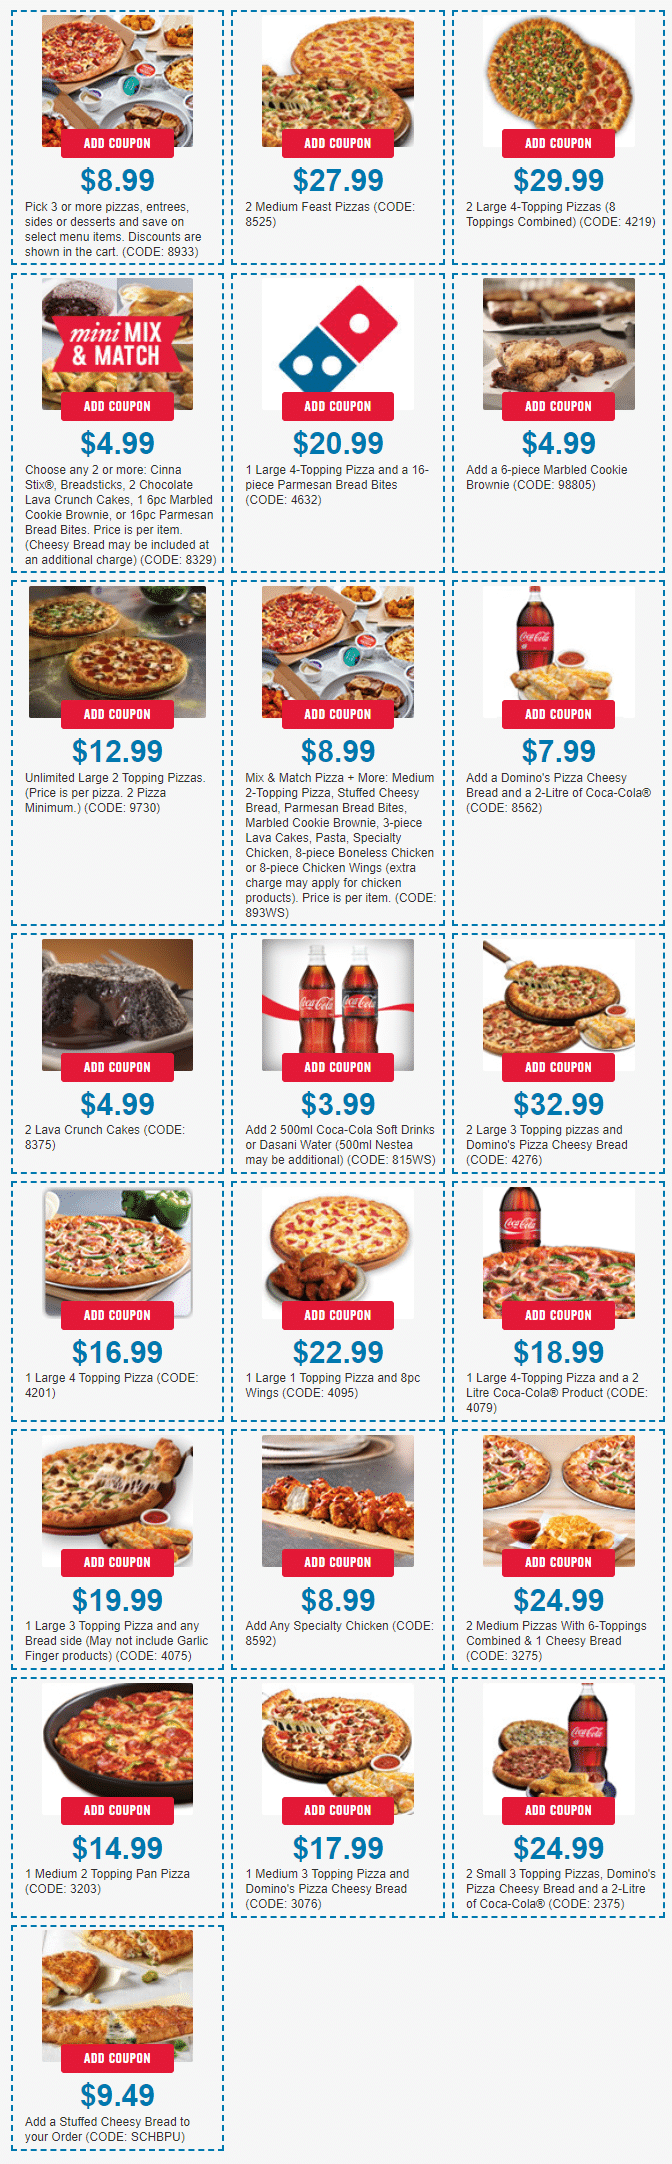 dominos coupons January 30th